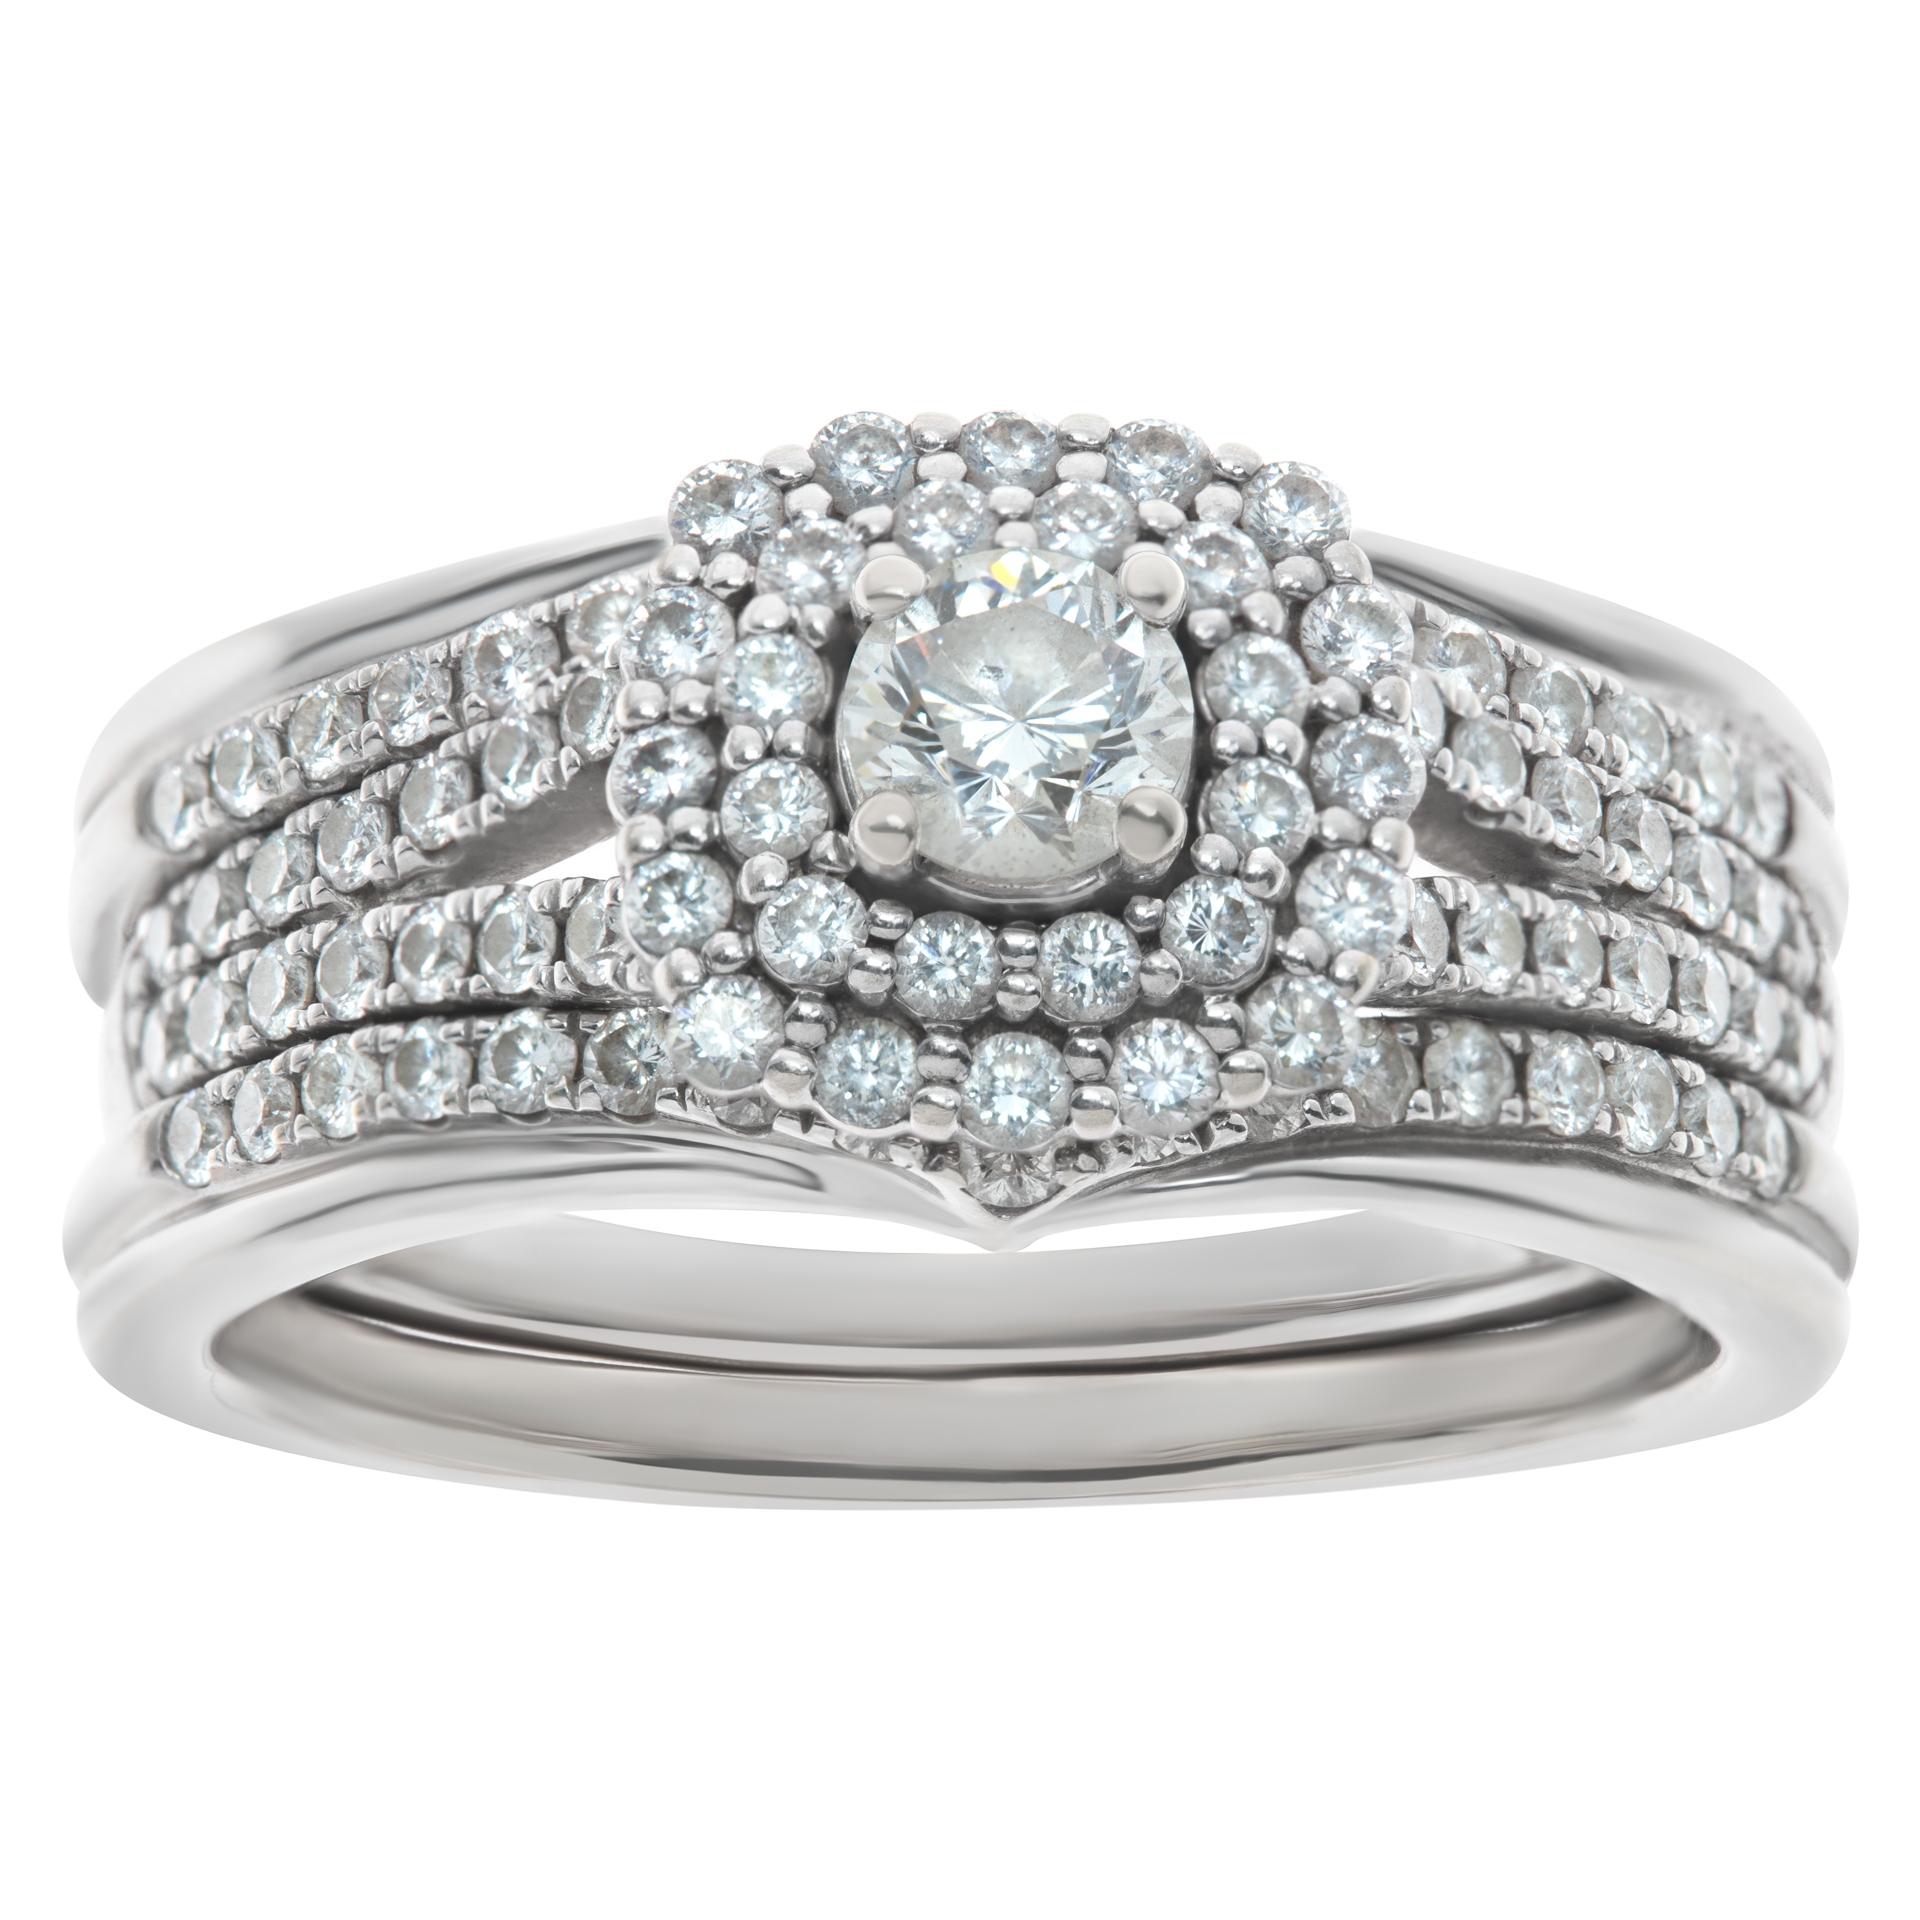 Engagement ring with removable wedding band in 14k white gold with 1.38 carats